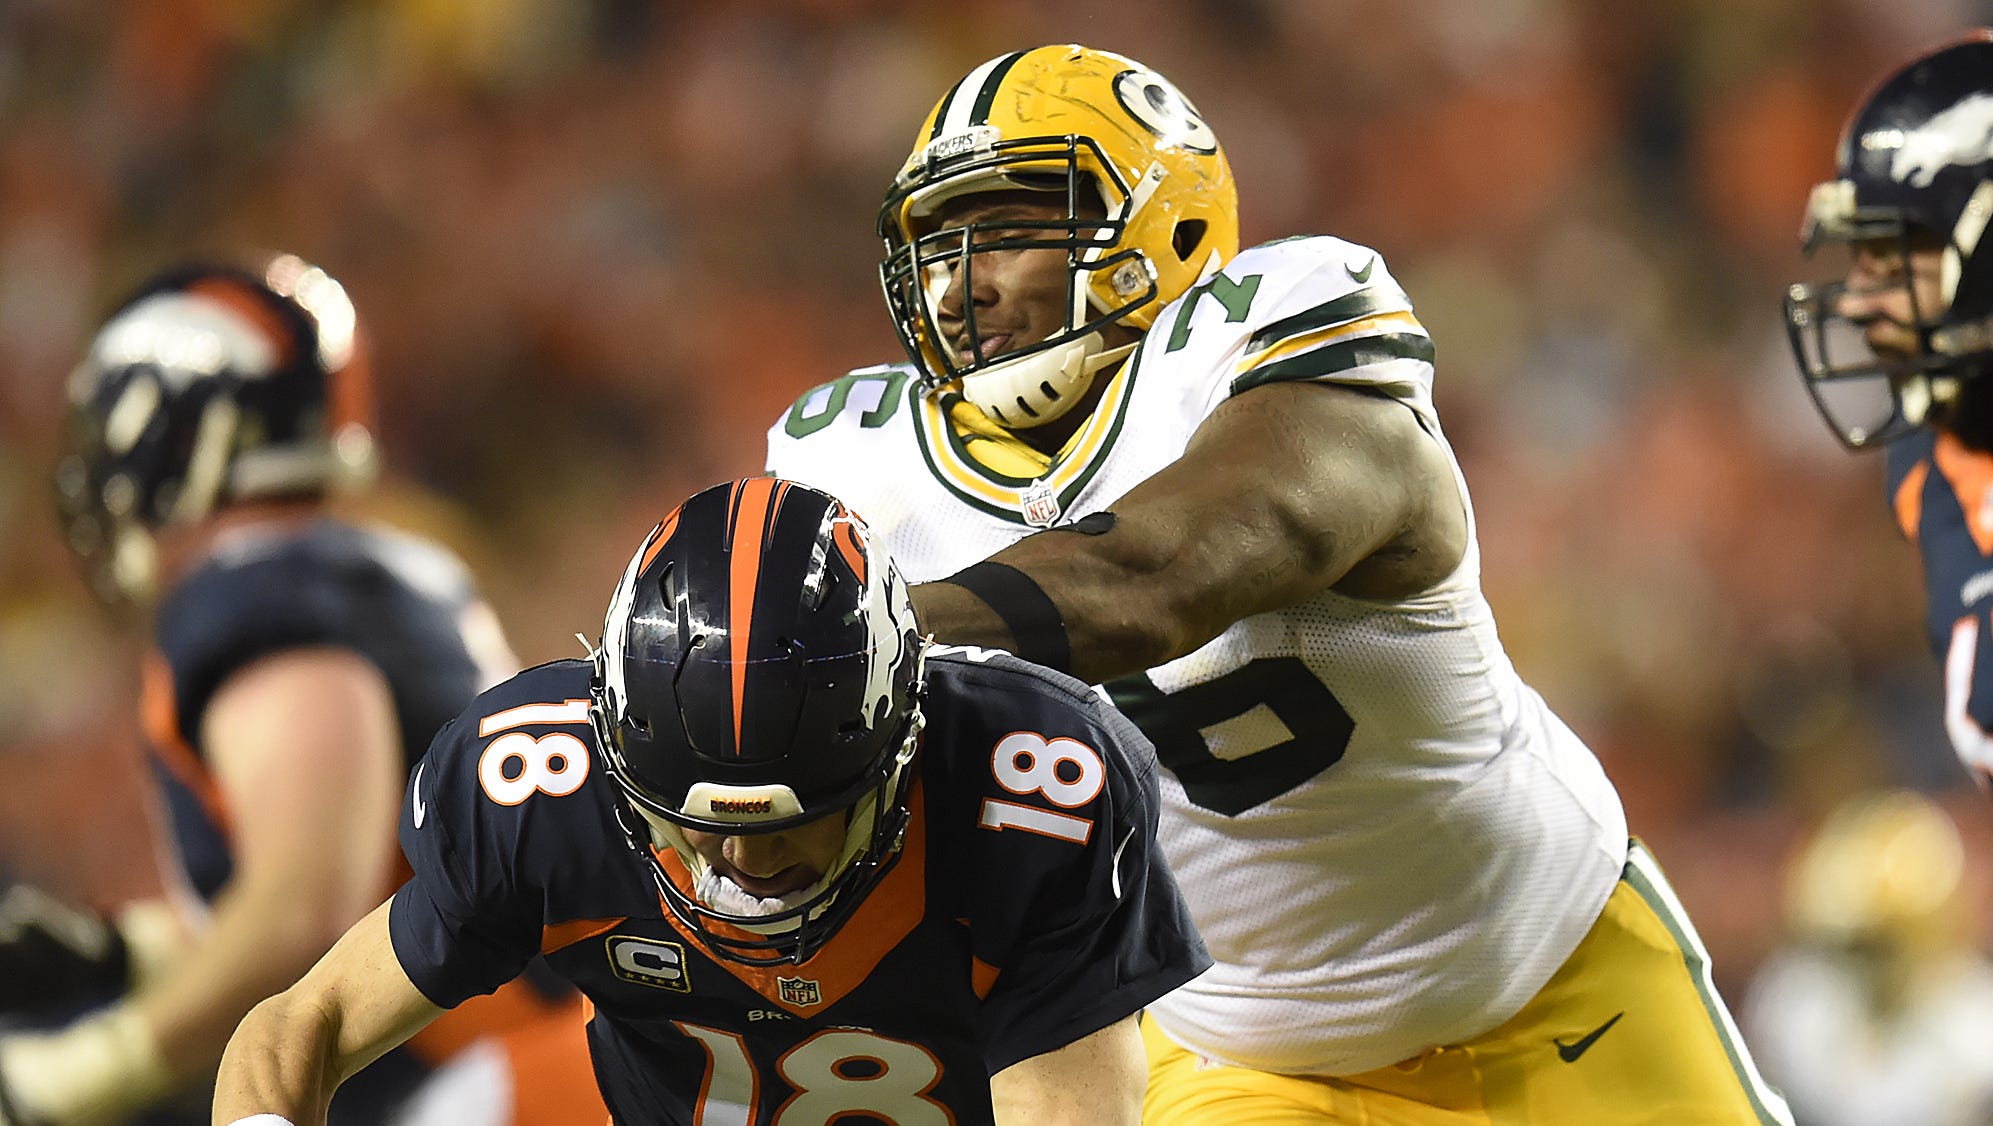 Green Bay Packers defensive tackle Mike Daniels (76) hits Denver Broncos quarterback Peyton Manning (18) on Nov. 1, 2015, at Sports Authority Field in Denver.